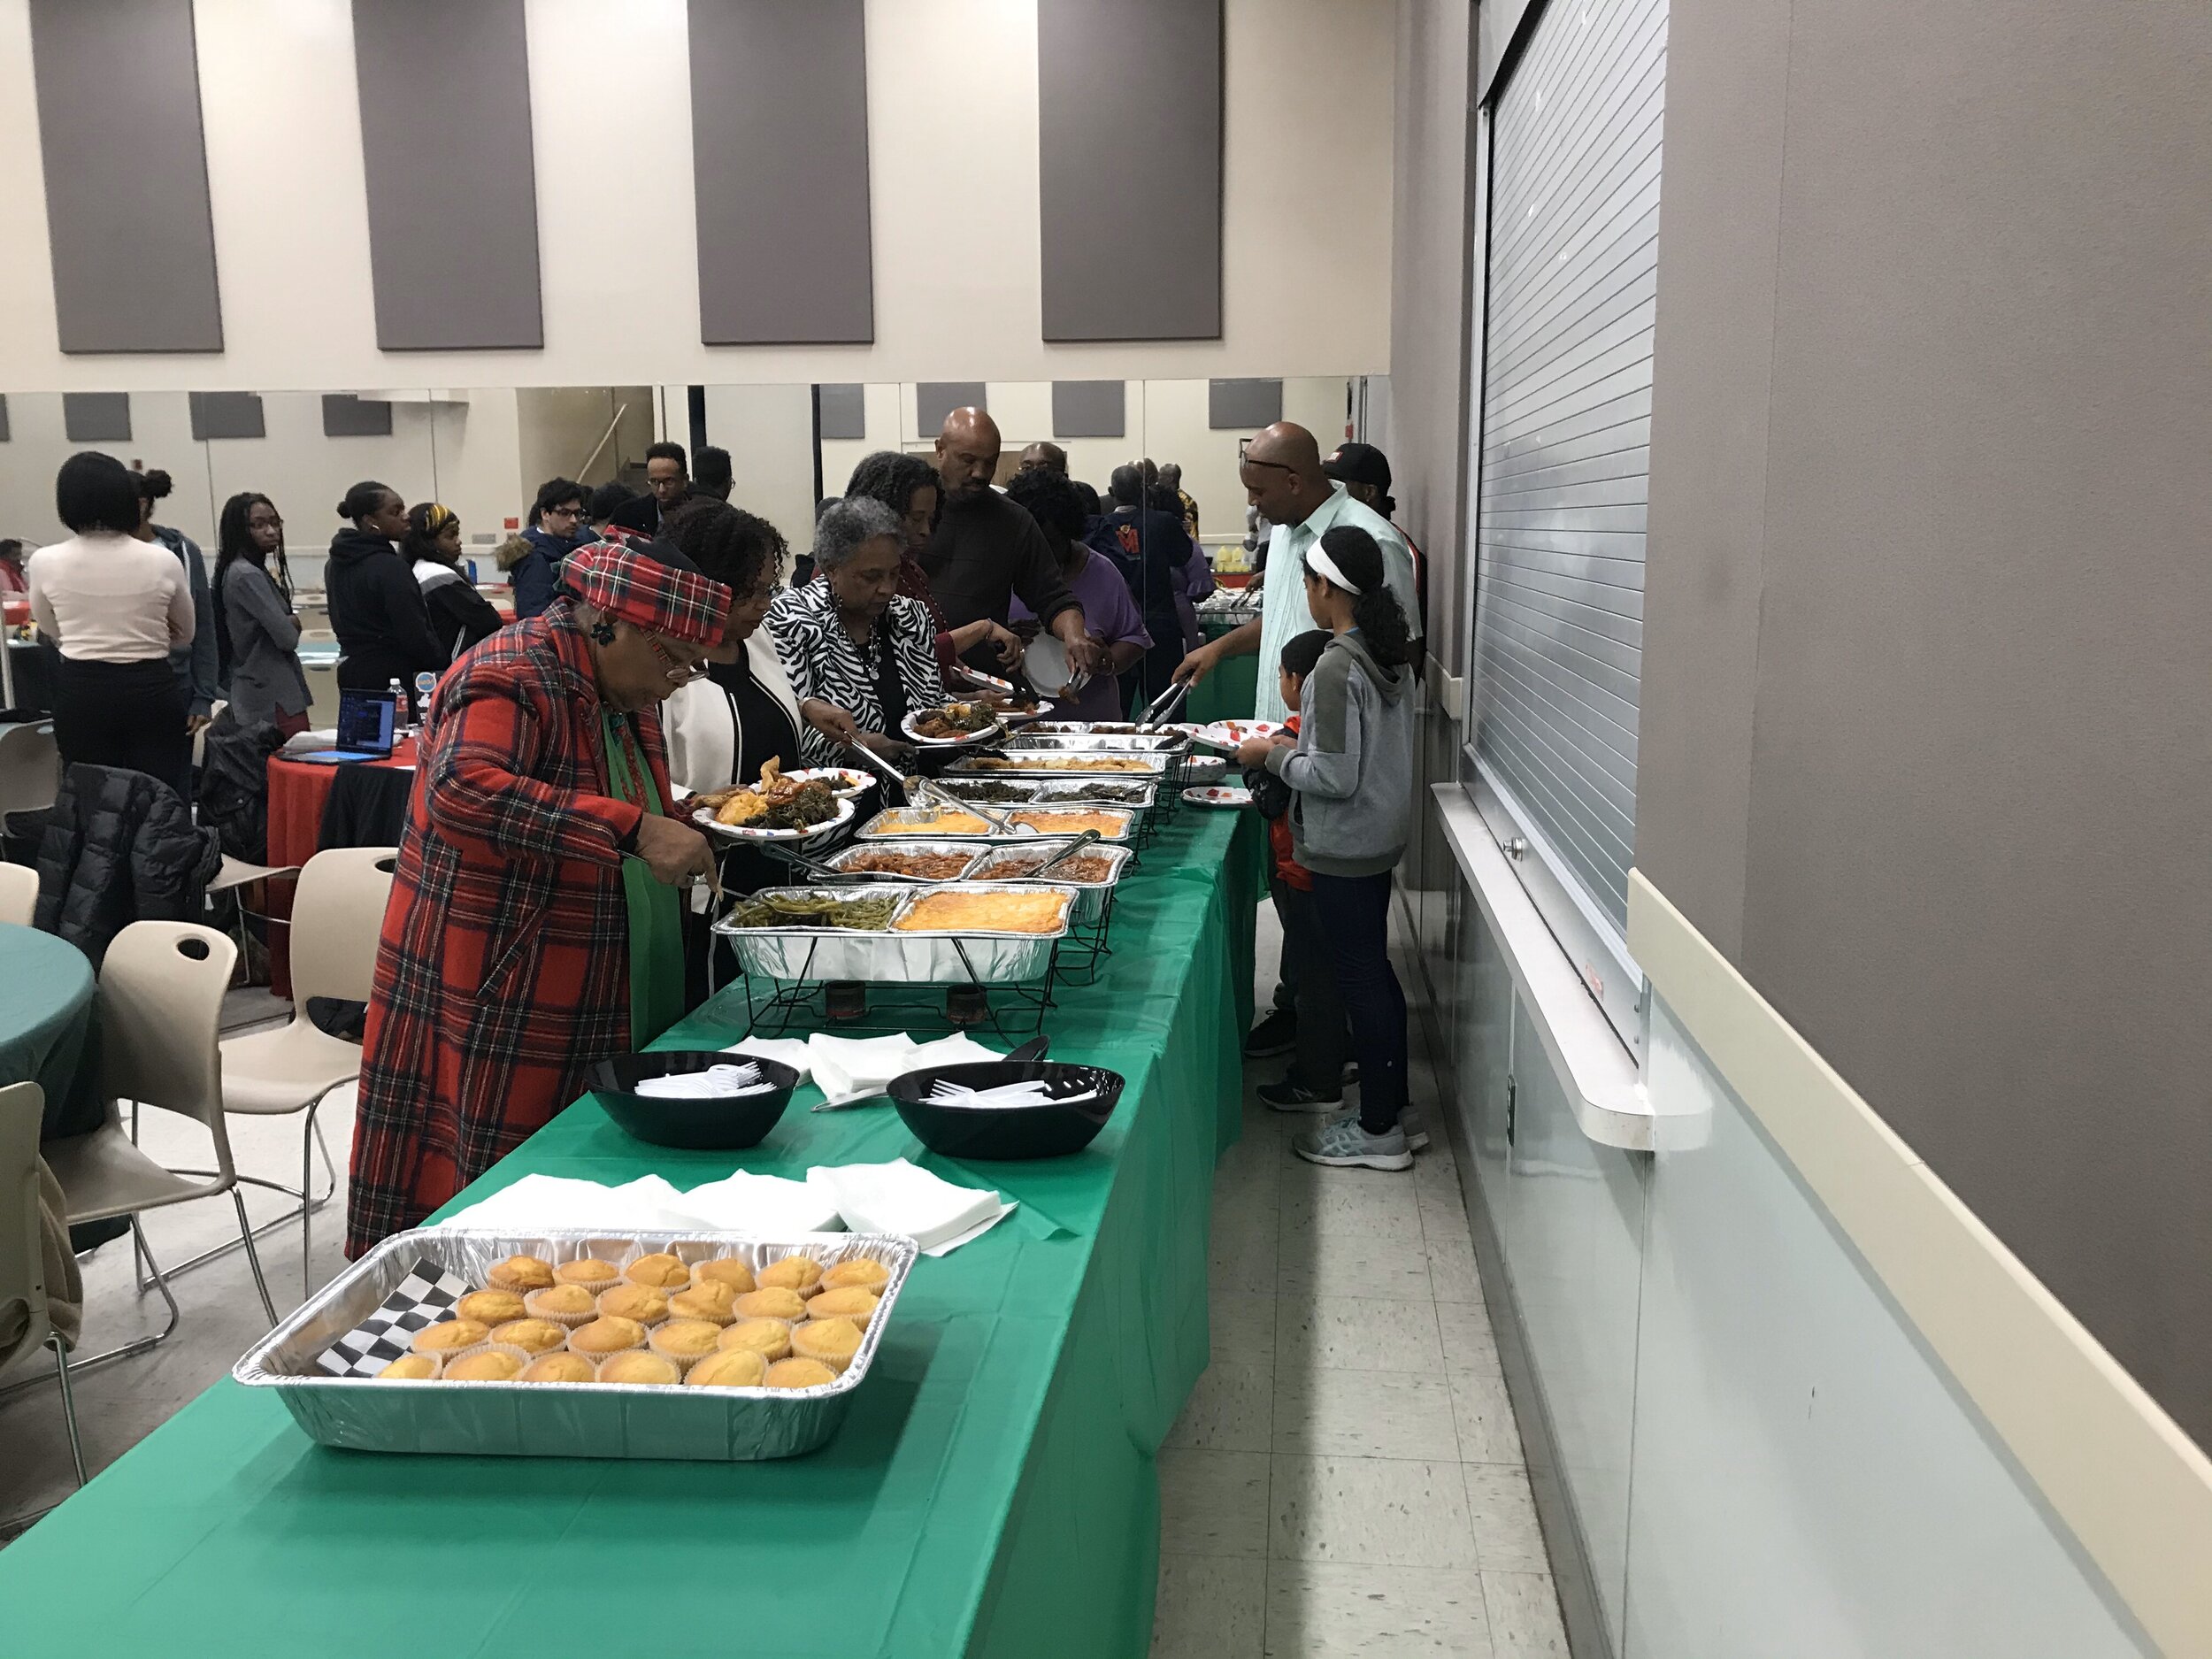  Students and faculty gather to enjoy wings, baked chicken, fried fish, and other foods. (Zamir Courtney/The Black Explosion) 